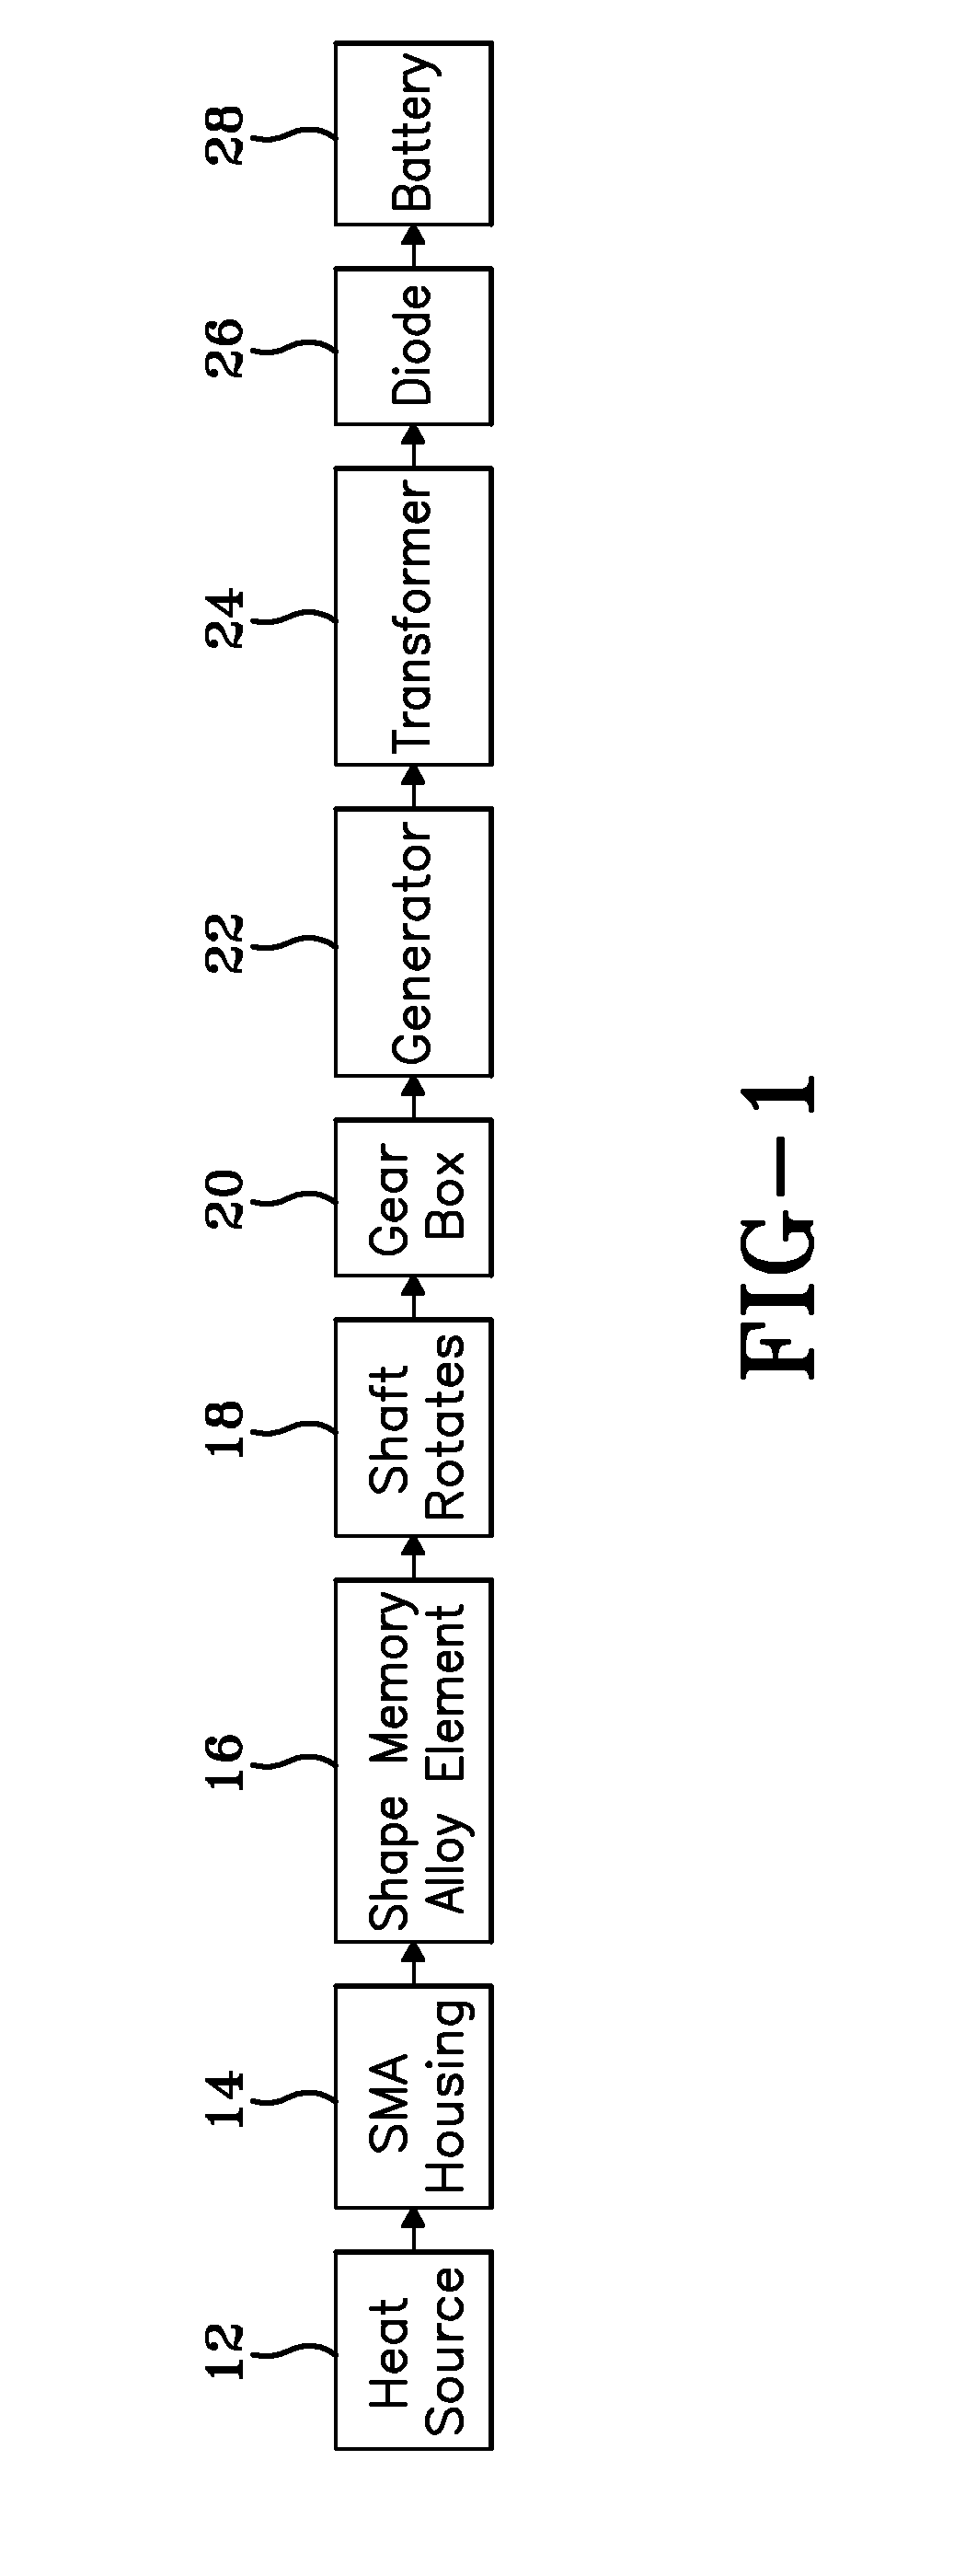 Thermal energy harvesting device